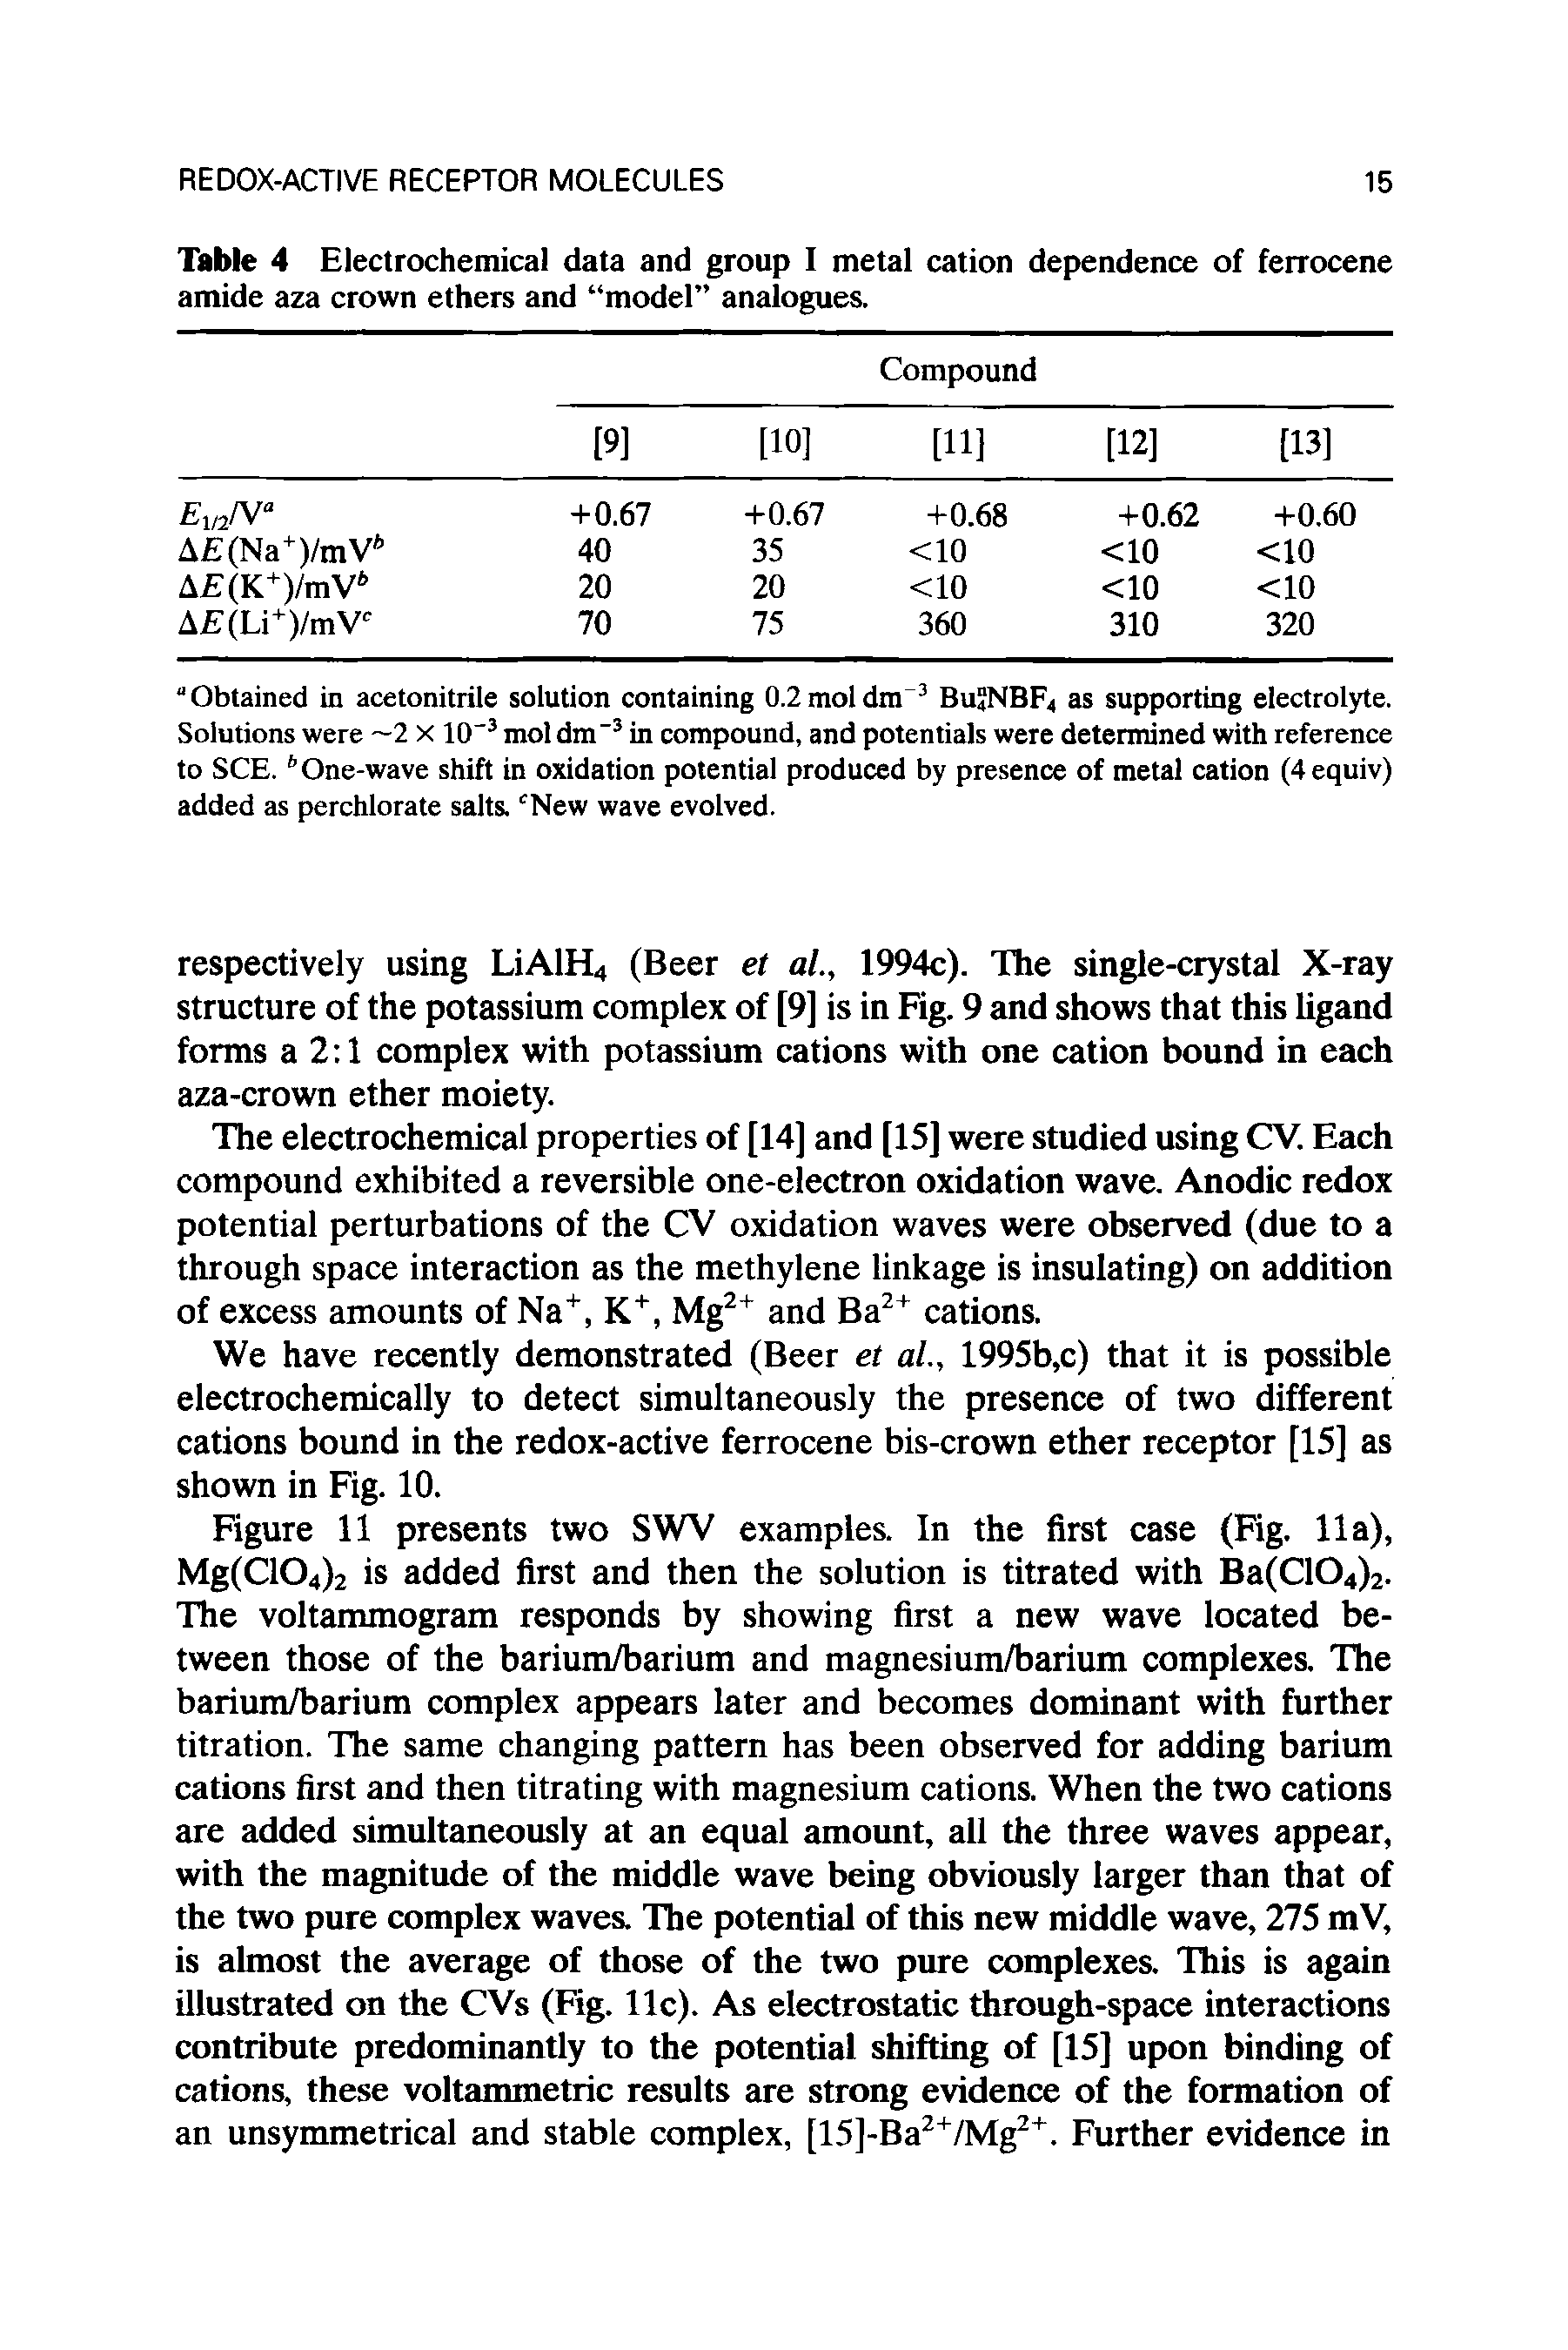 Table 4 Electrochemical data and group I metal cation dependence of ferrocene amide aza crown ethers and model analogues.